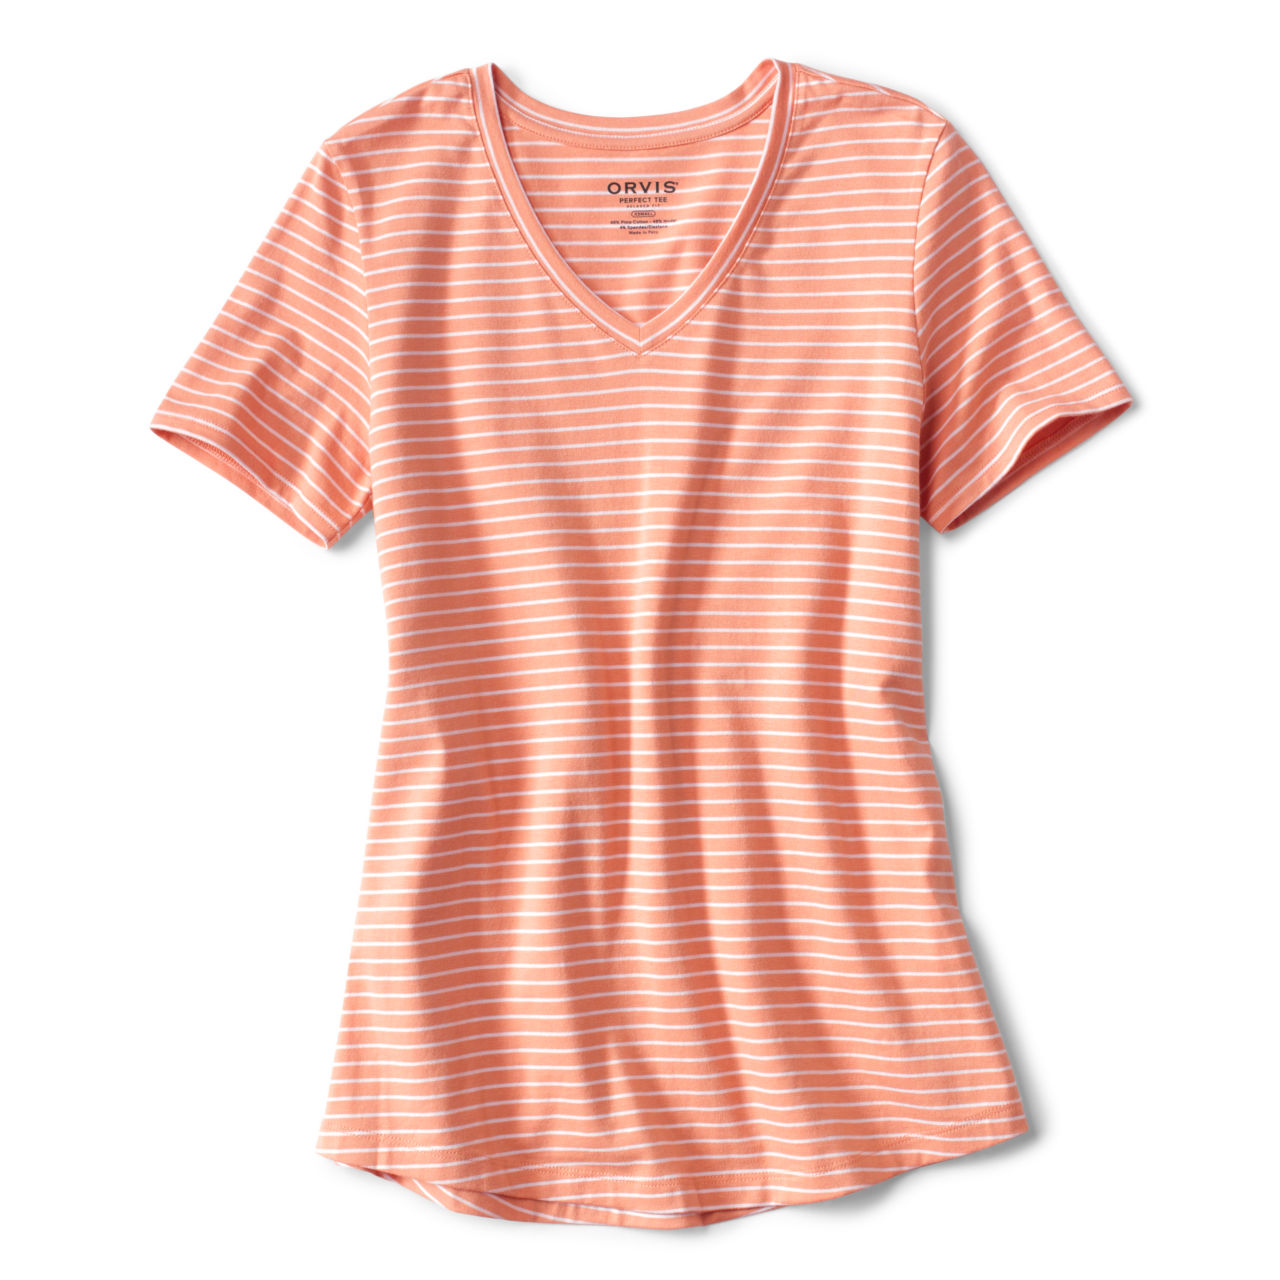 Perfect Relaxed V-Neck Short-Sleeved Tee - SUNSET MINI STRIPE image number 0